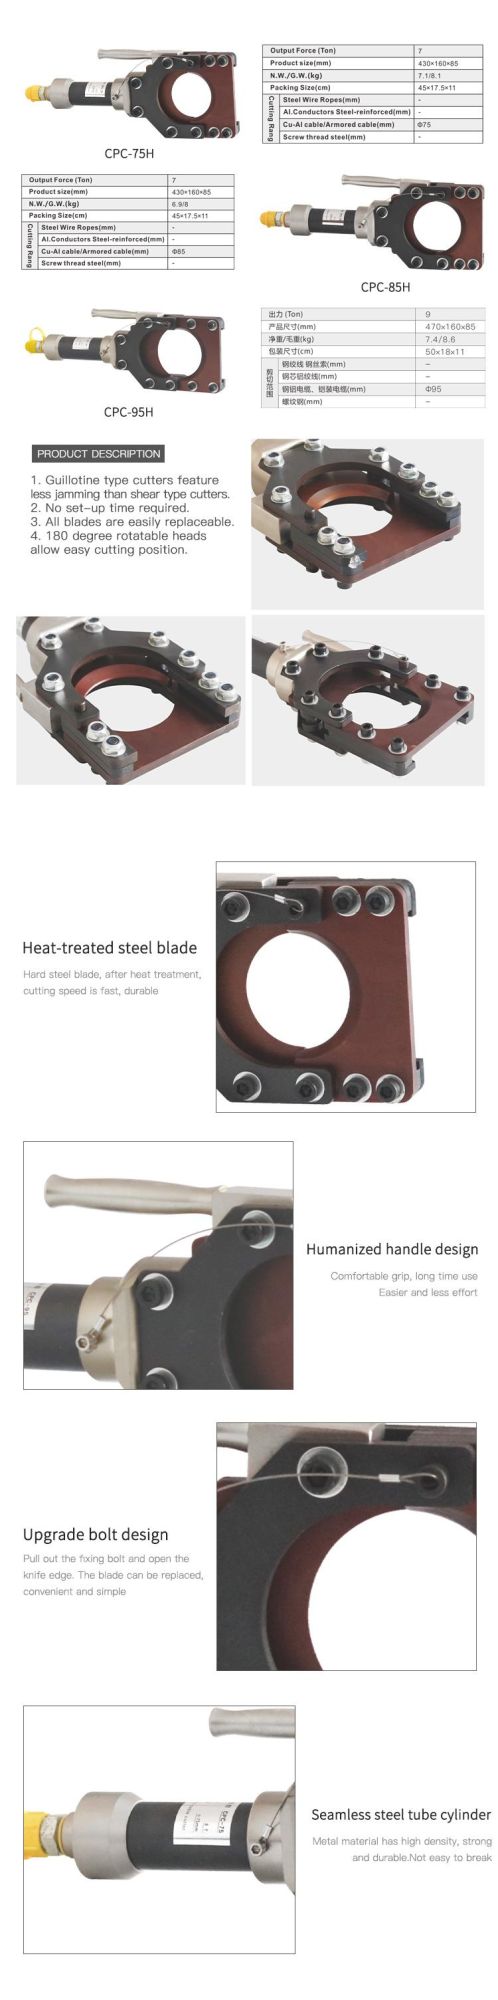 Separate Unit Hydraulic Copper and Amored Cable Cutter (RF-85)